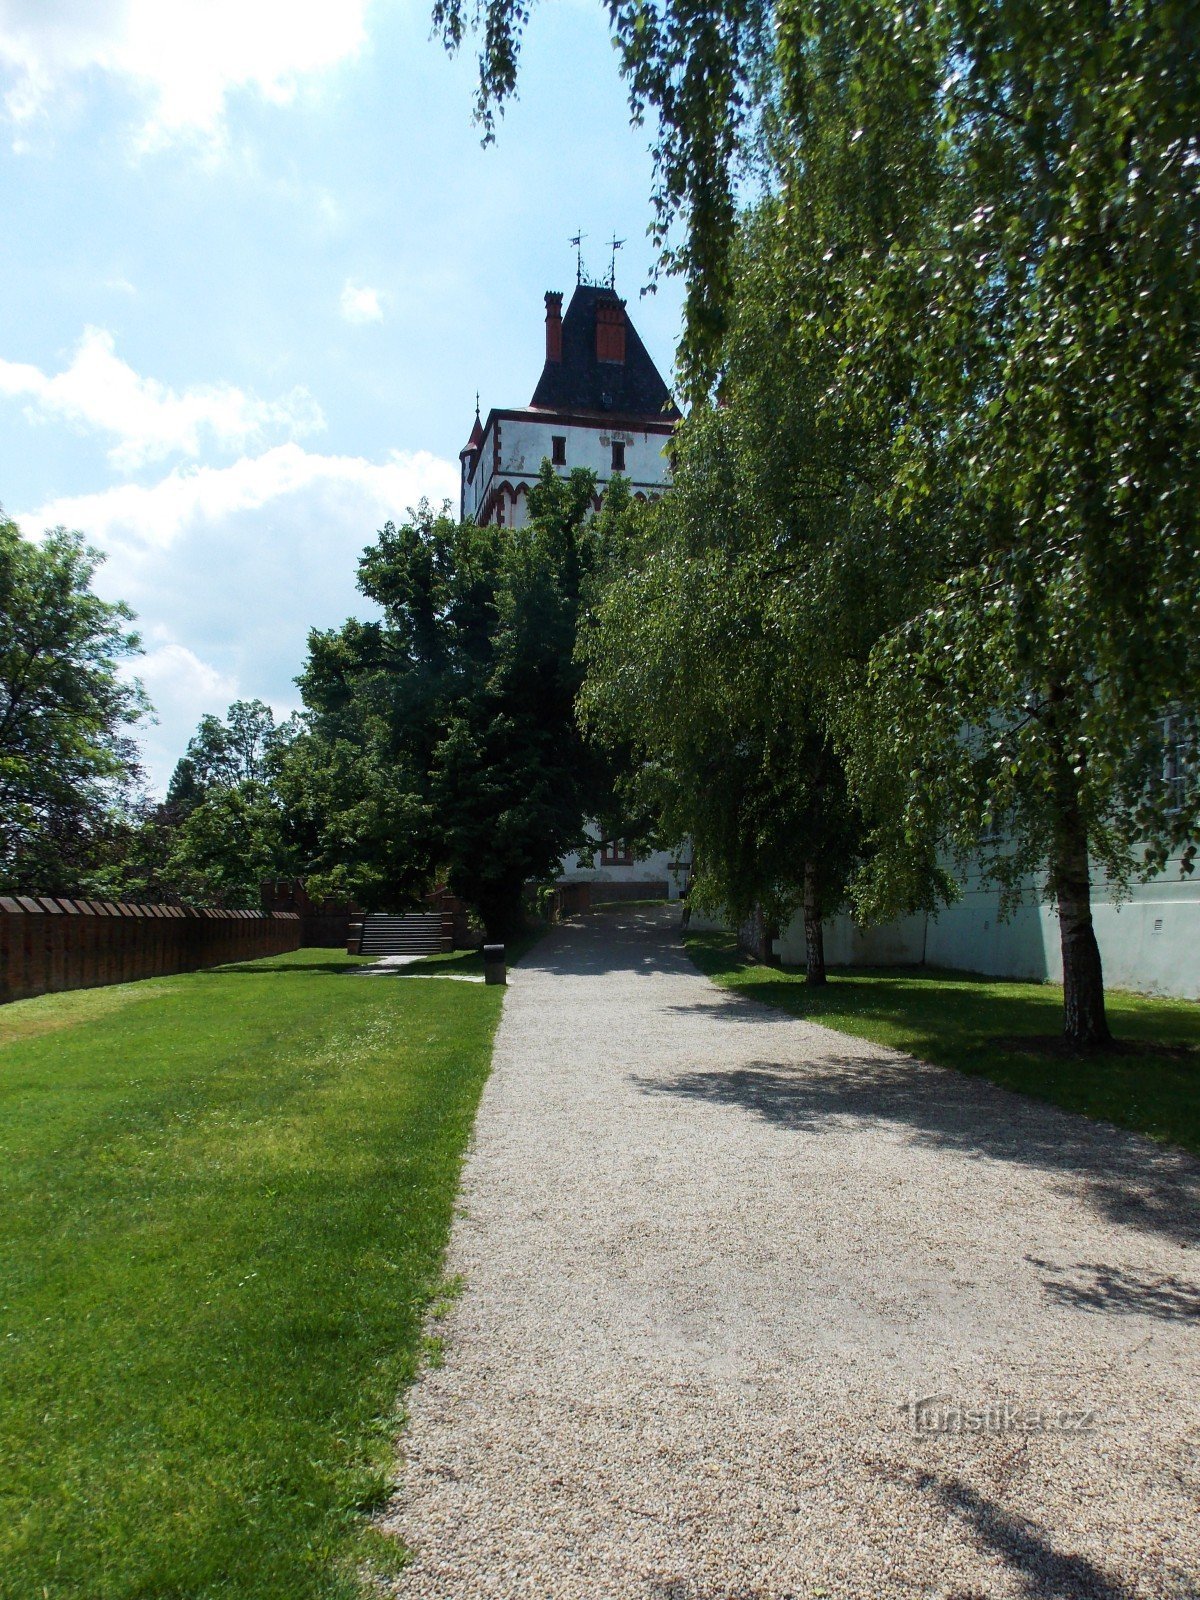 The white water tower in the castle park in Hradec nad Moravicí